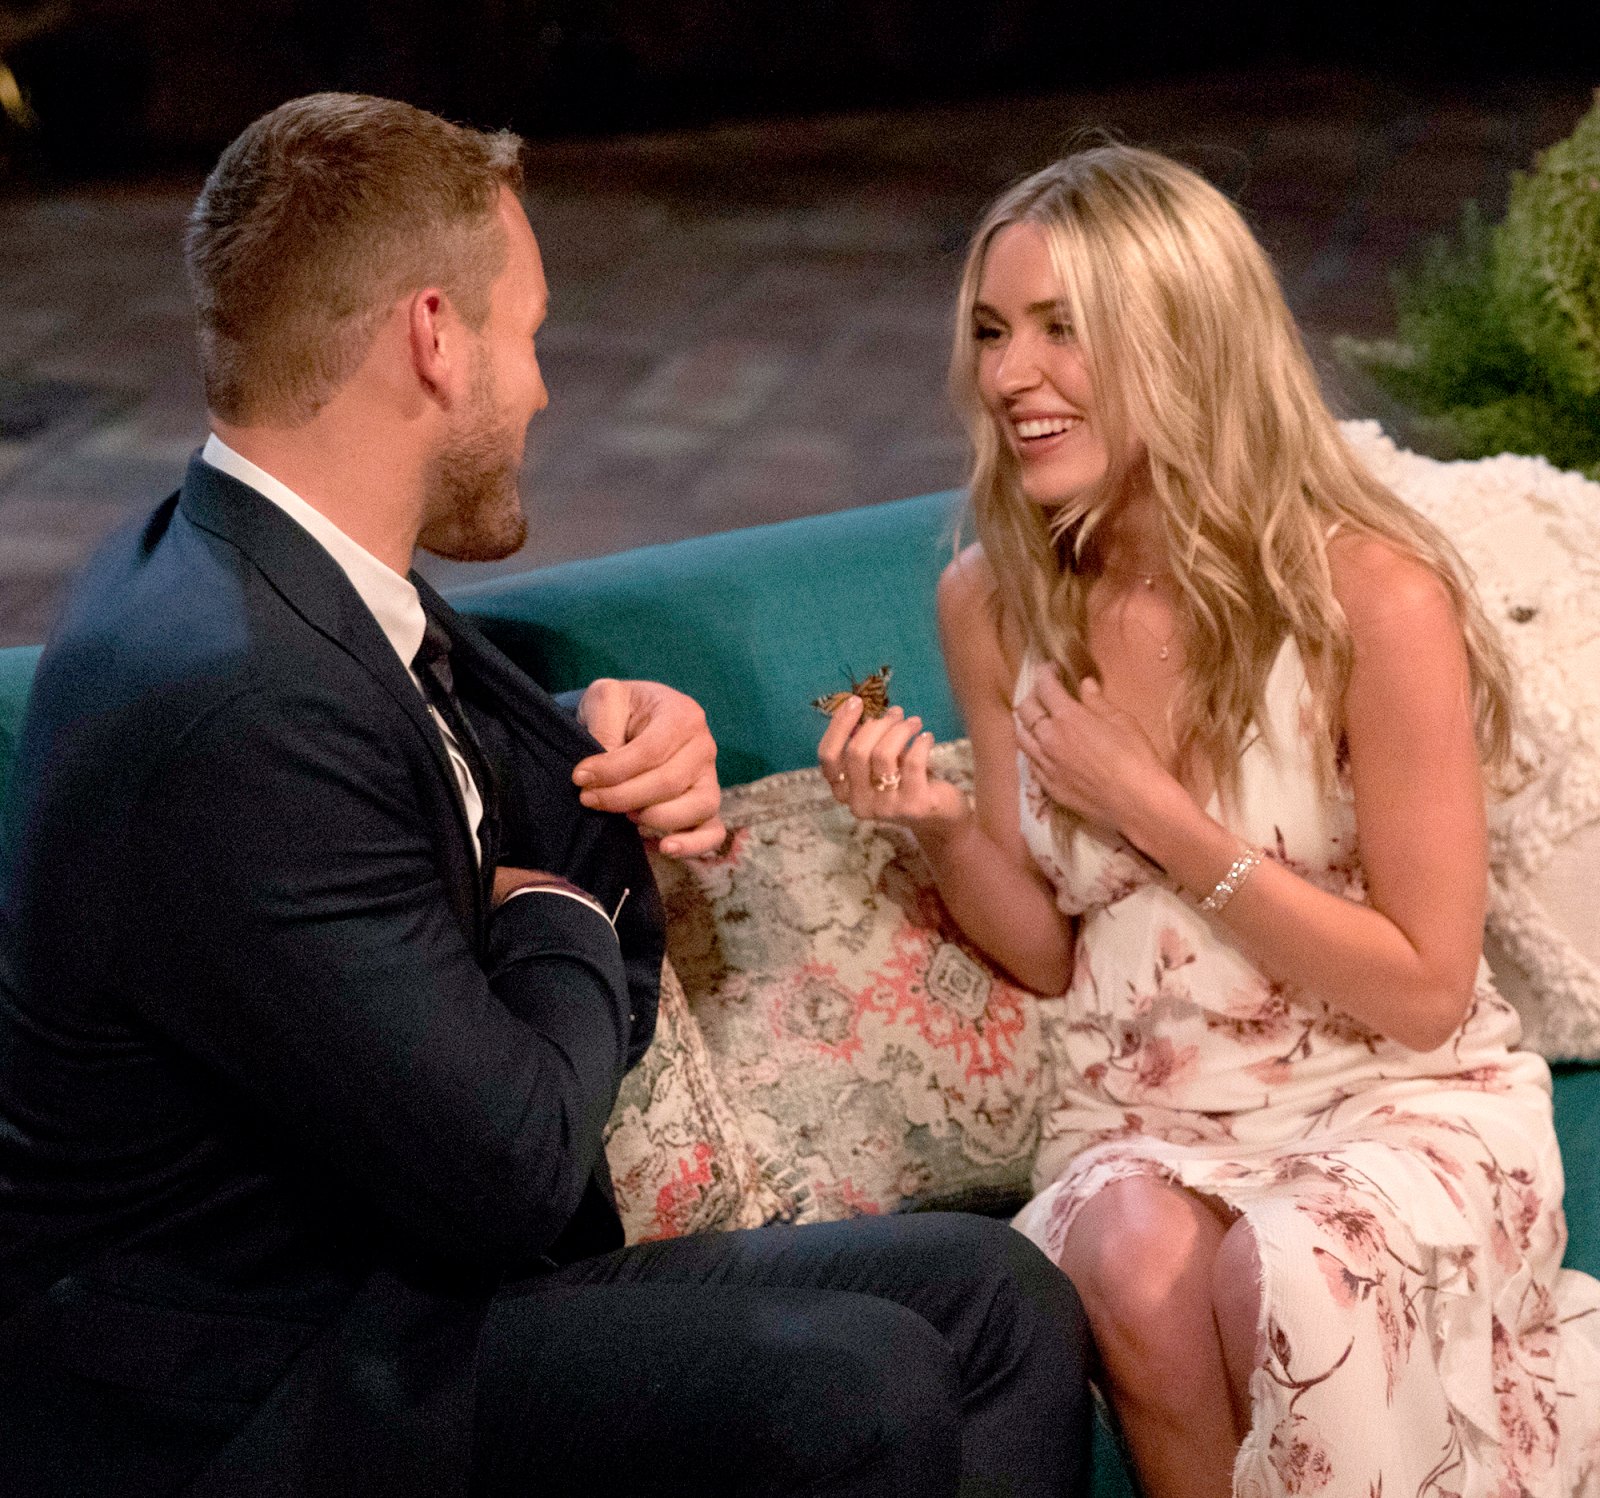 Cassie Randolph ‘Hopes’ for ‘Private’ Colton Underwood Proposal